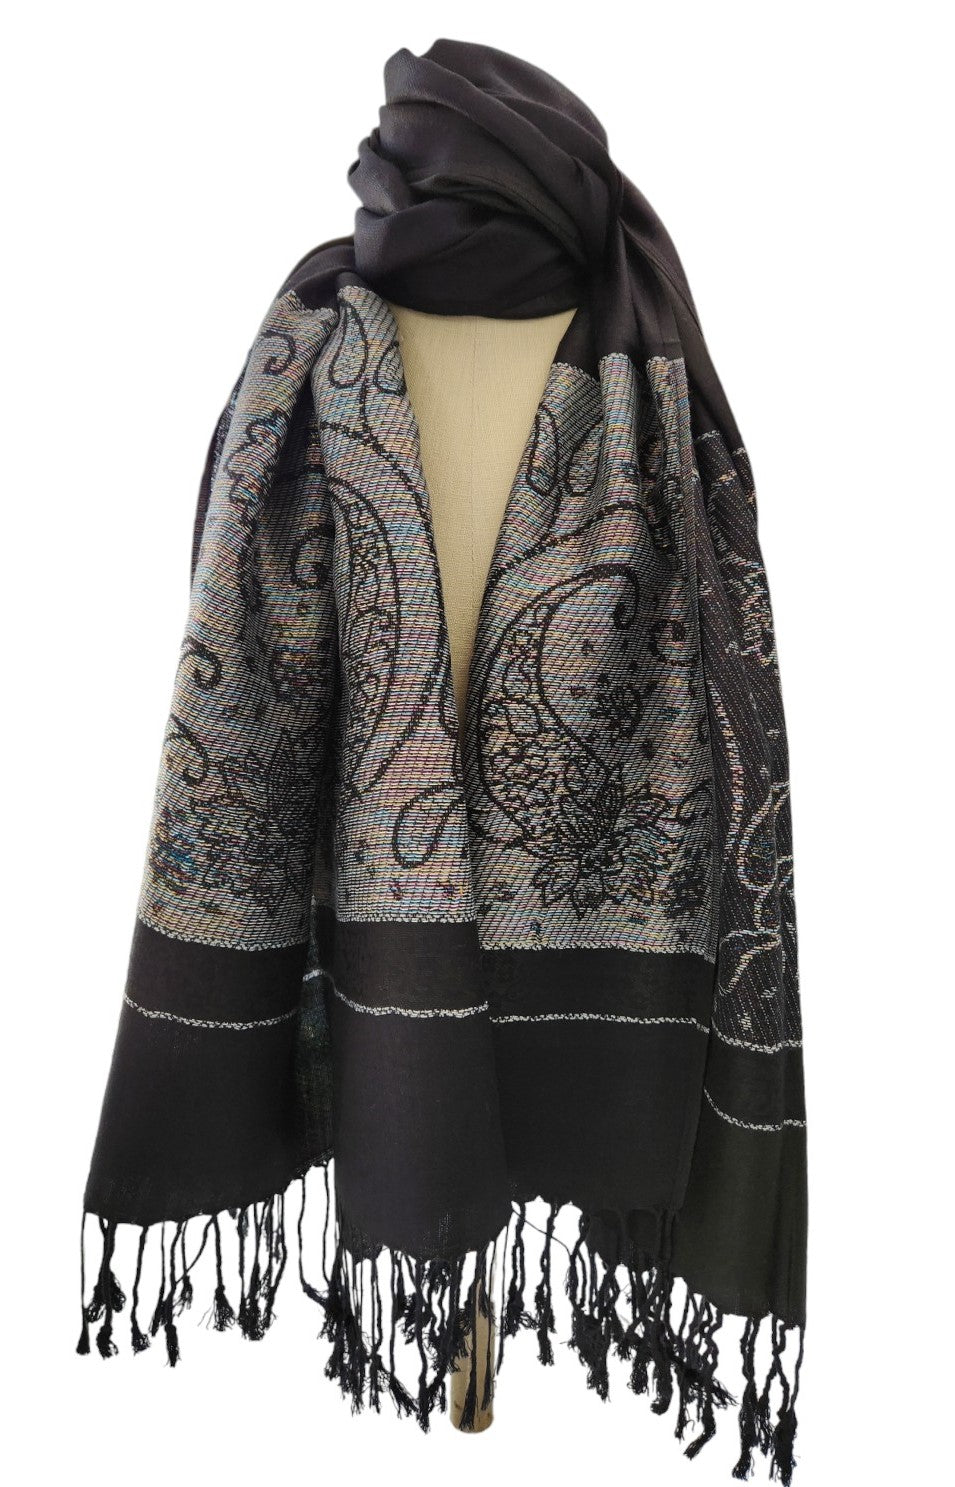 Buy black Women&#39;s Lightweight Pashmina Floral Paisley Scarves or Wrap - Perfect for Warmer Weather and Change in Seasons